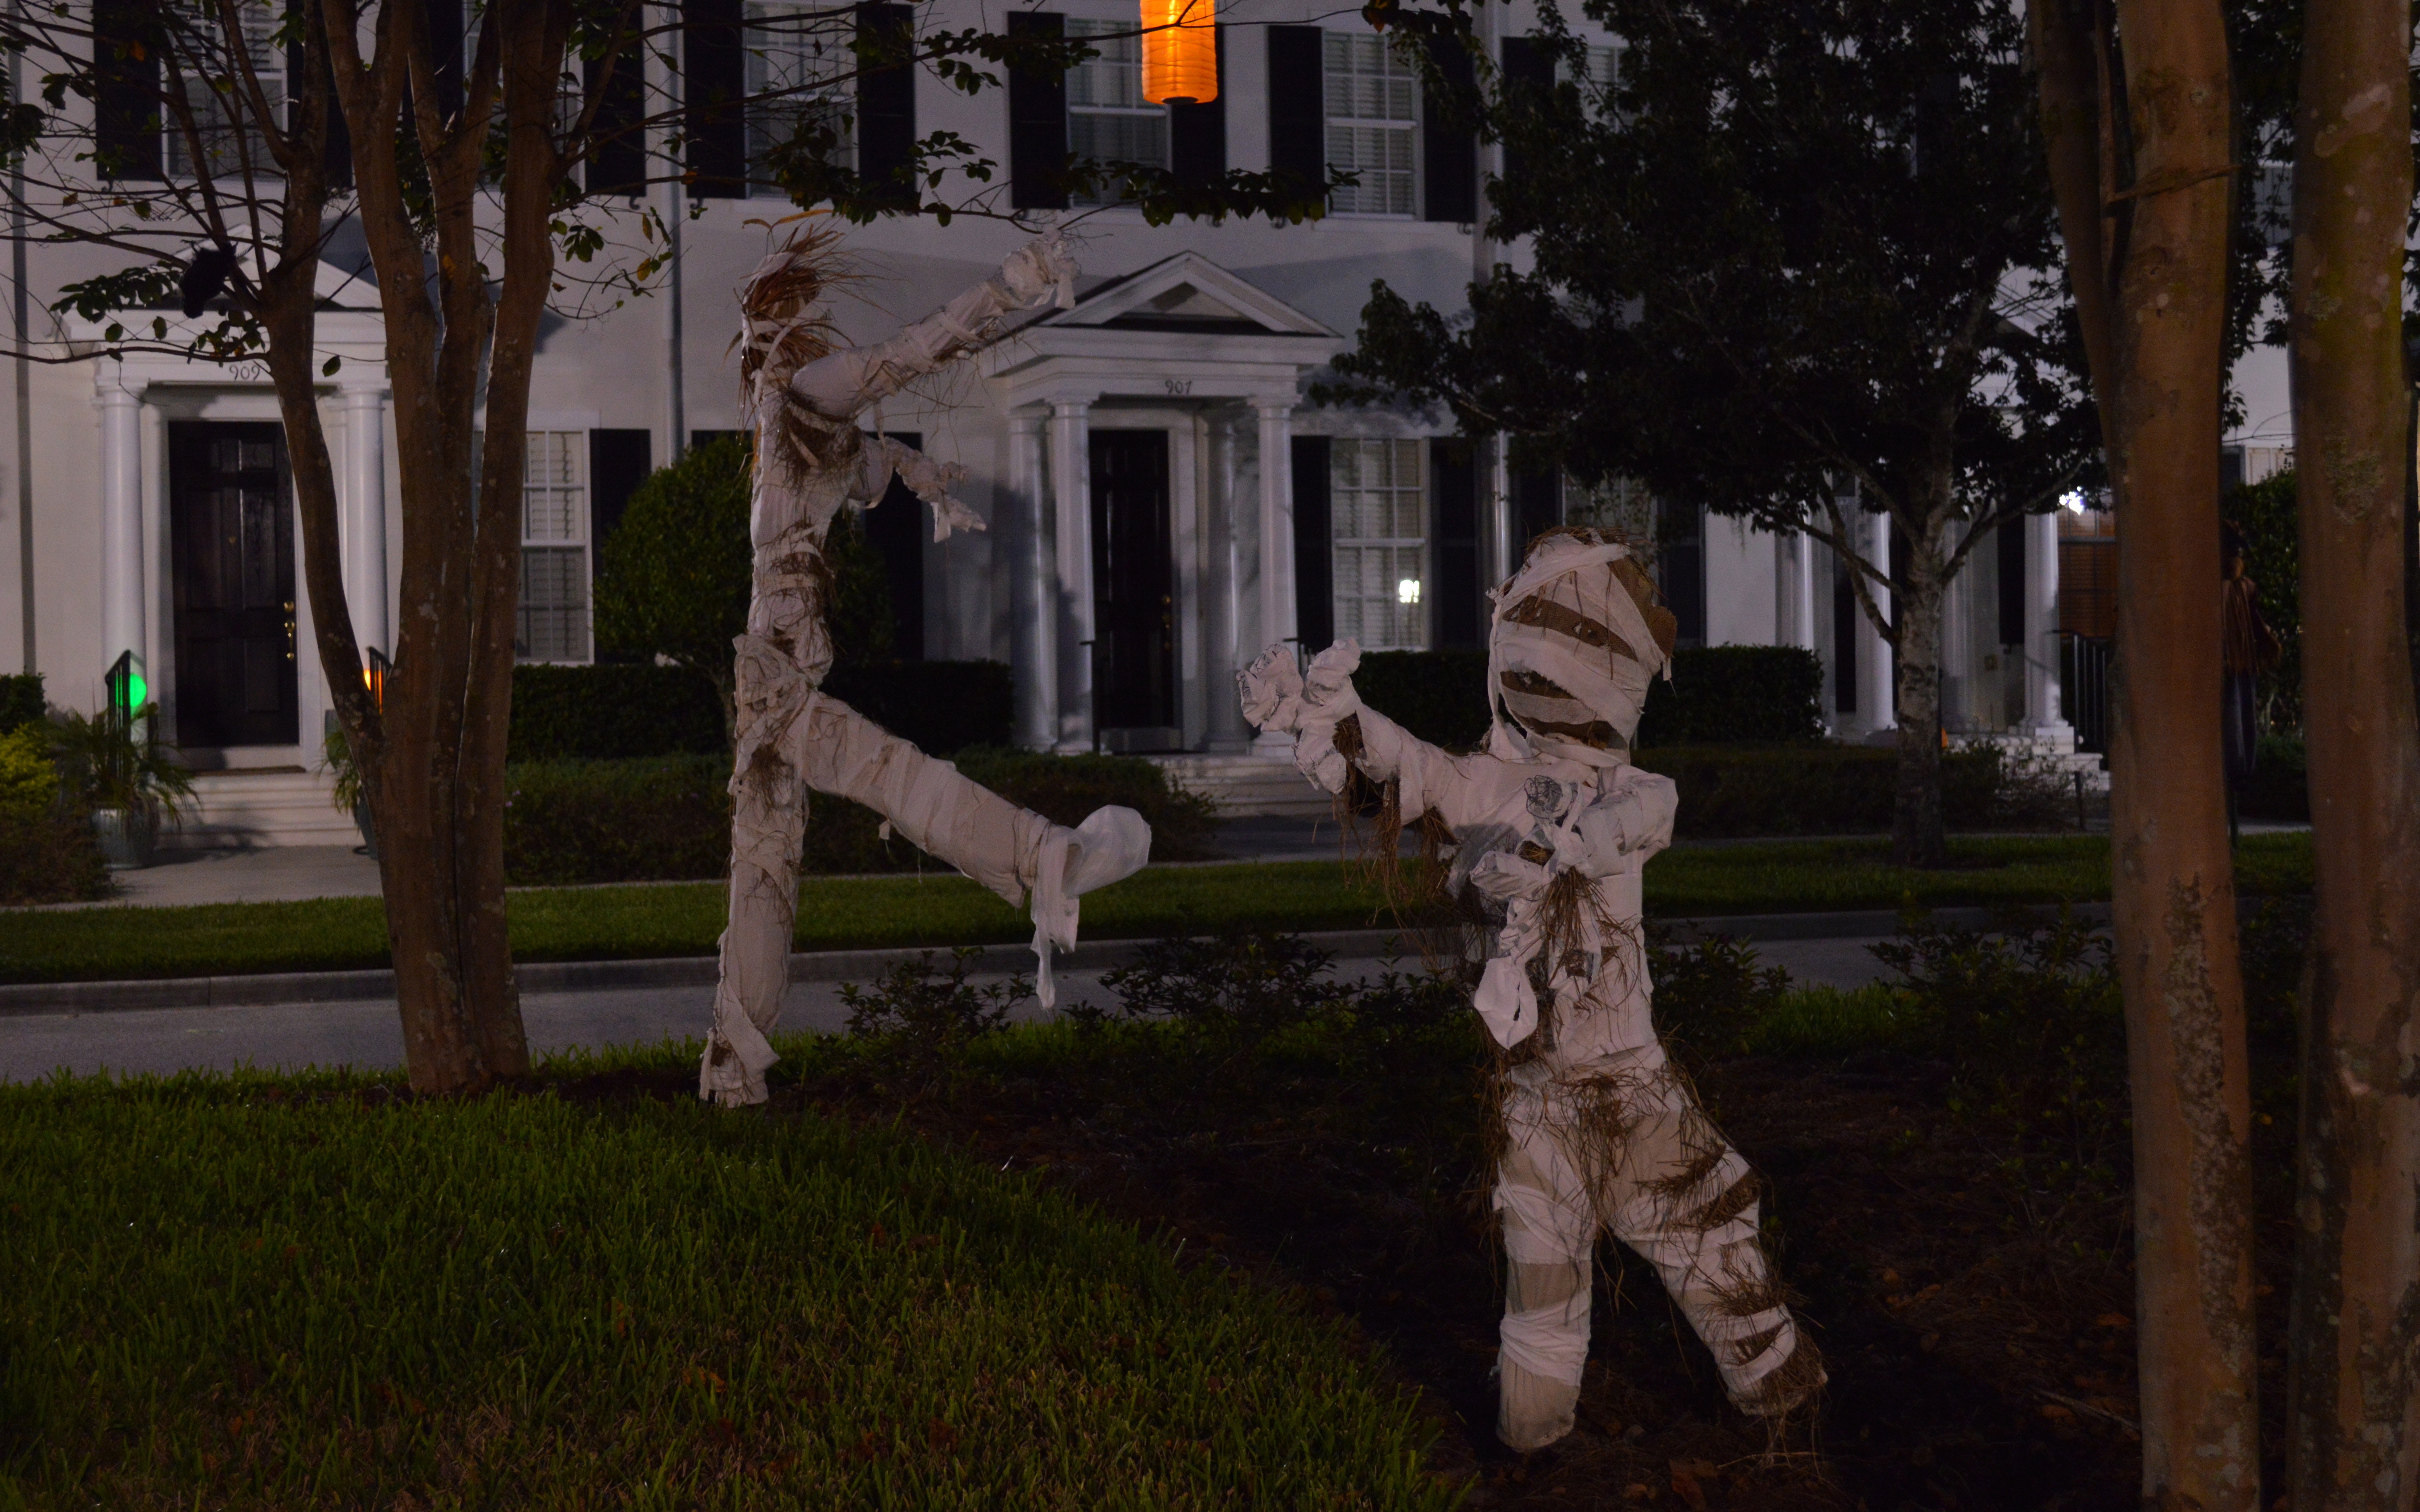 Mummy scarecrows for Halloween Decorations